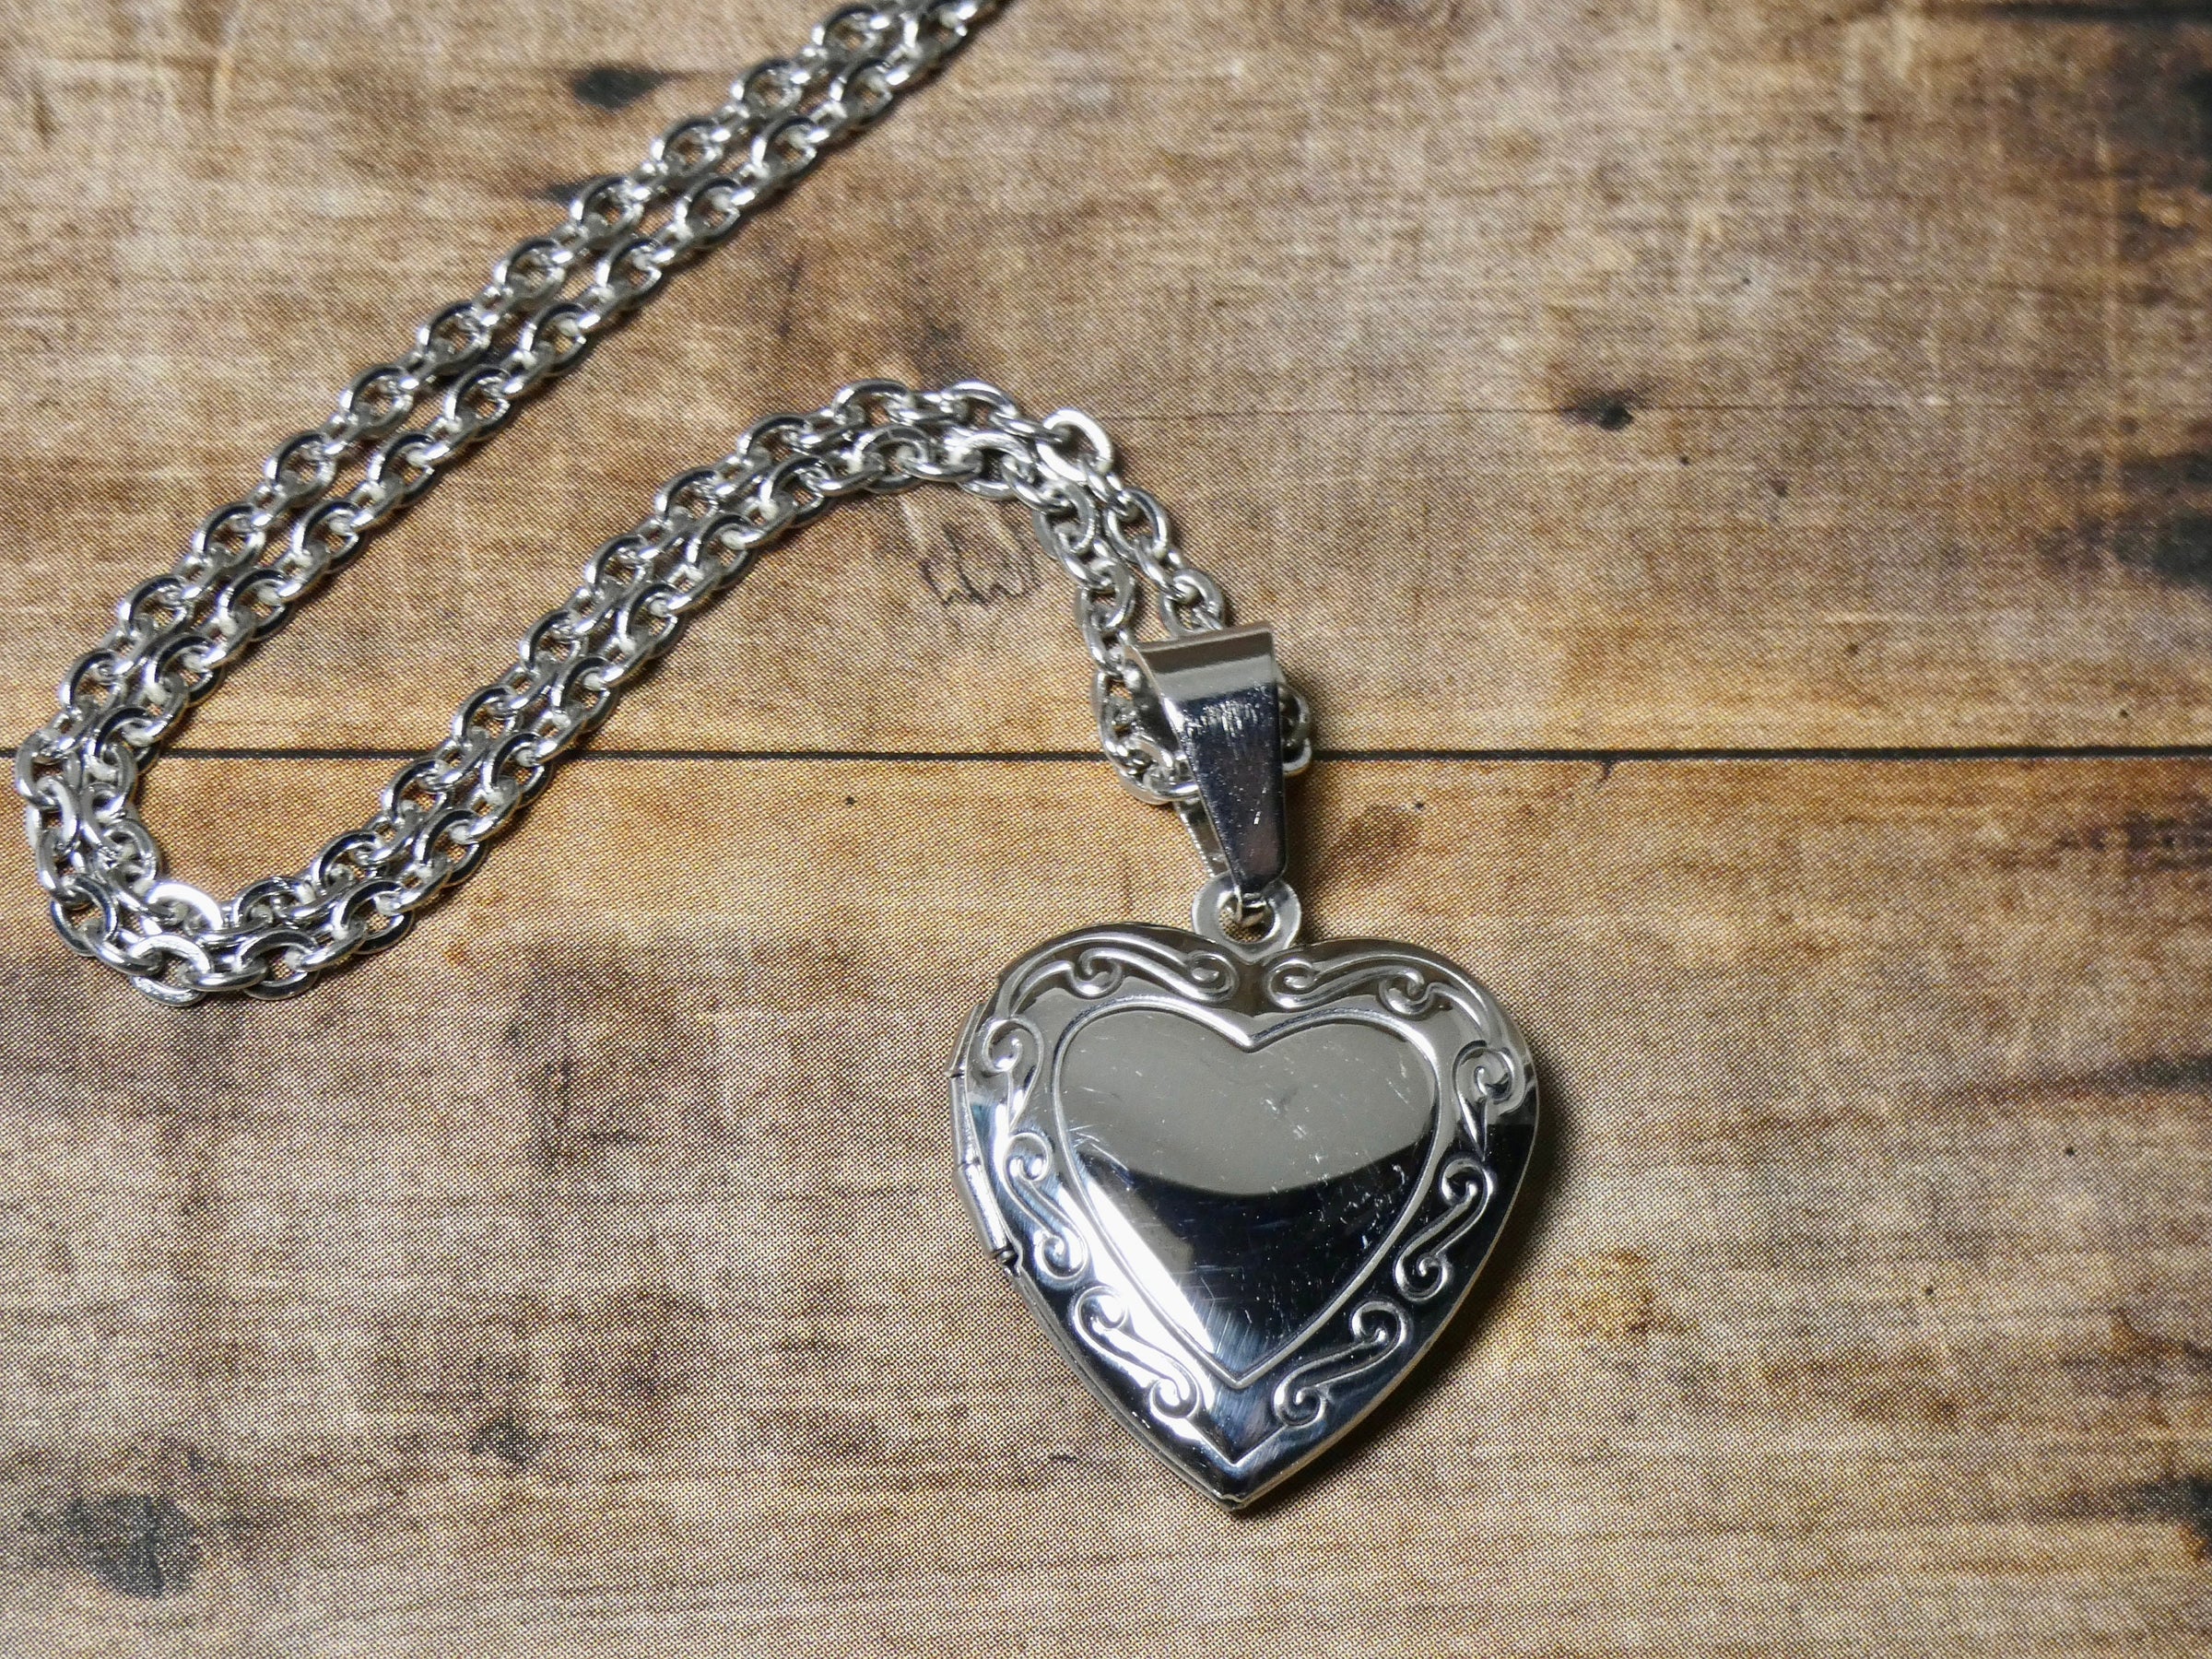 Heart Locket Necklace, Tiny Heart Photo Locket in Gold or Silver